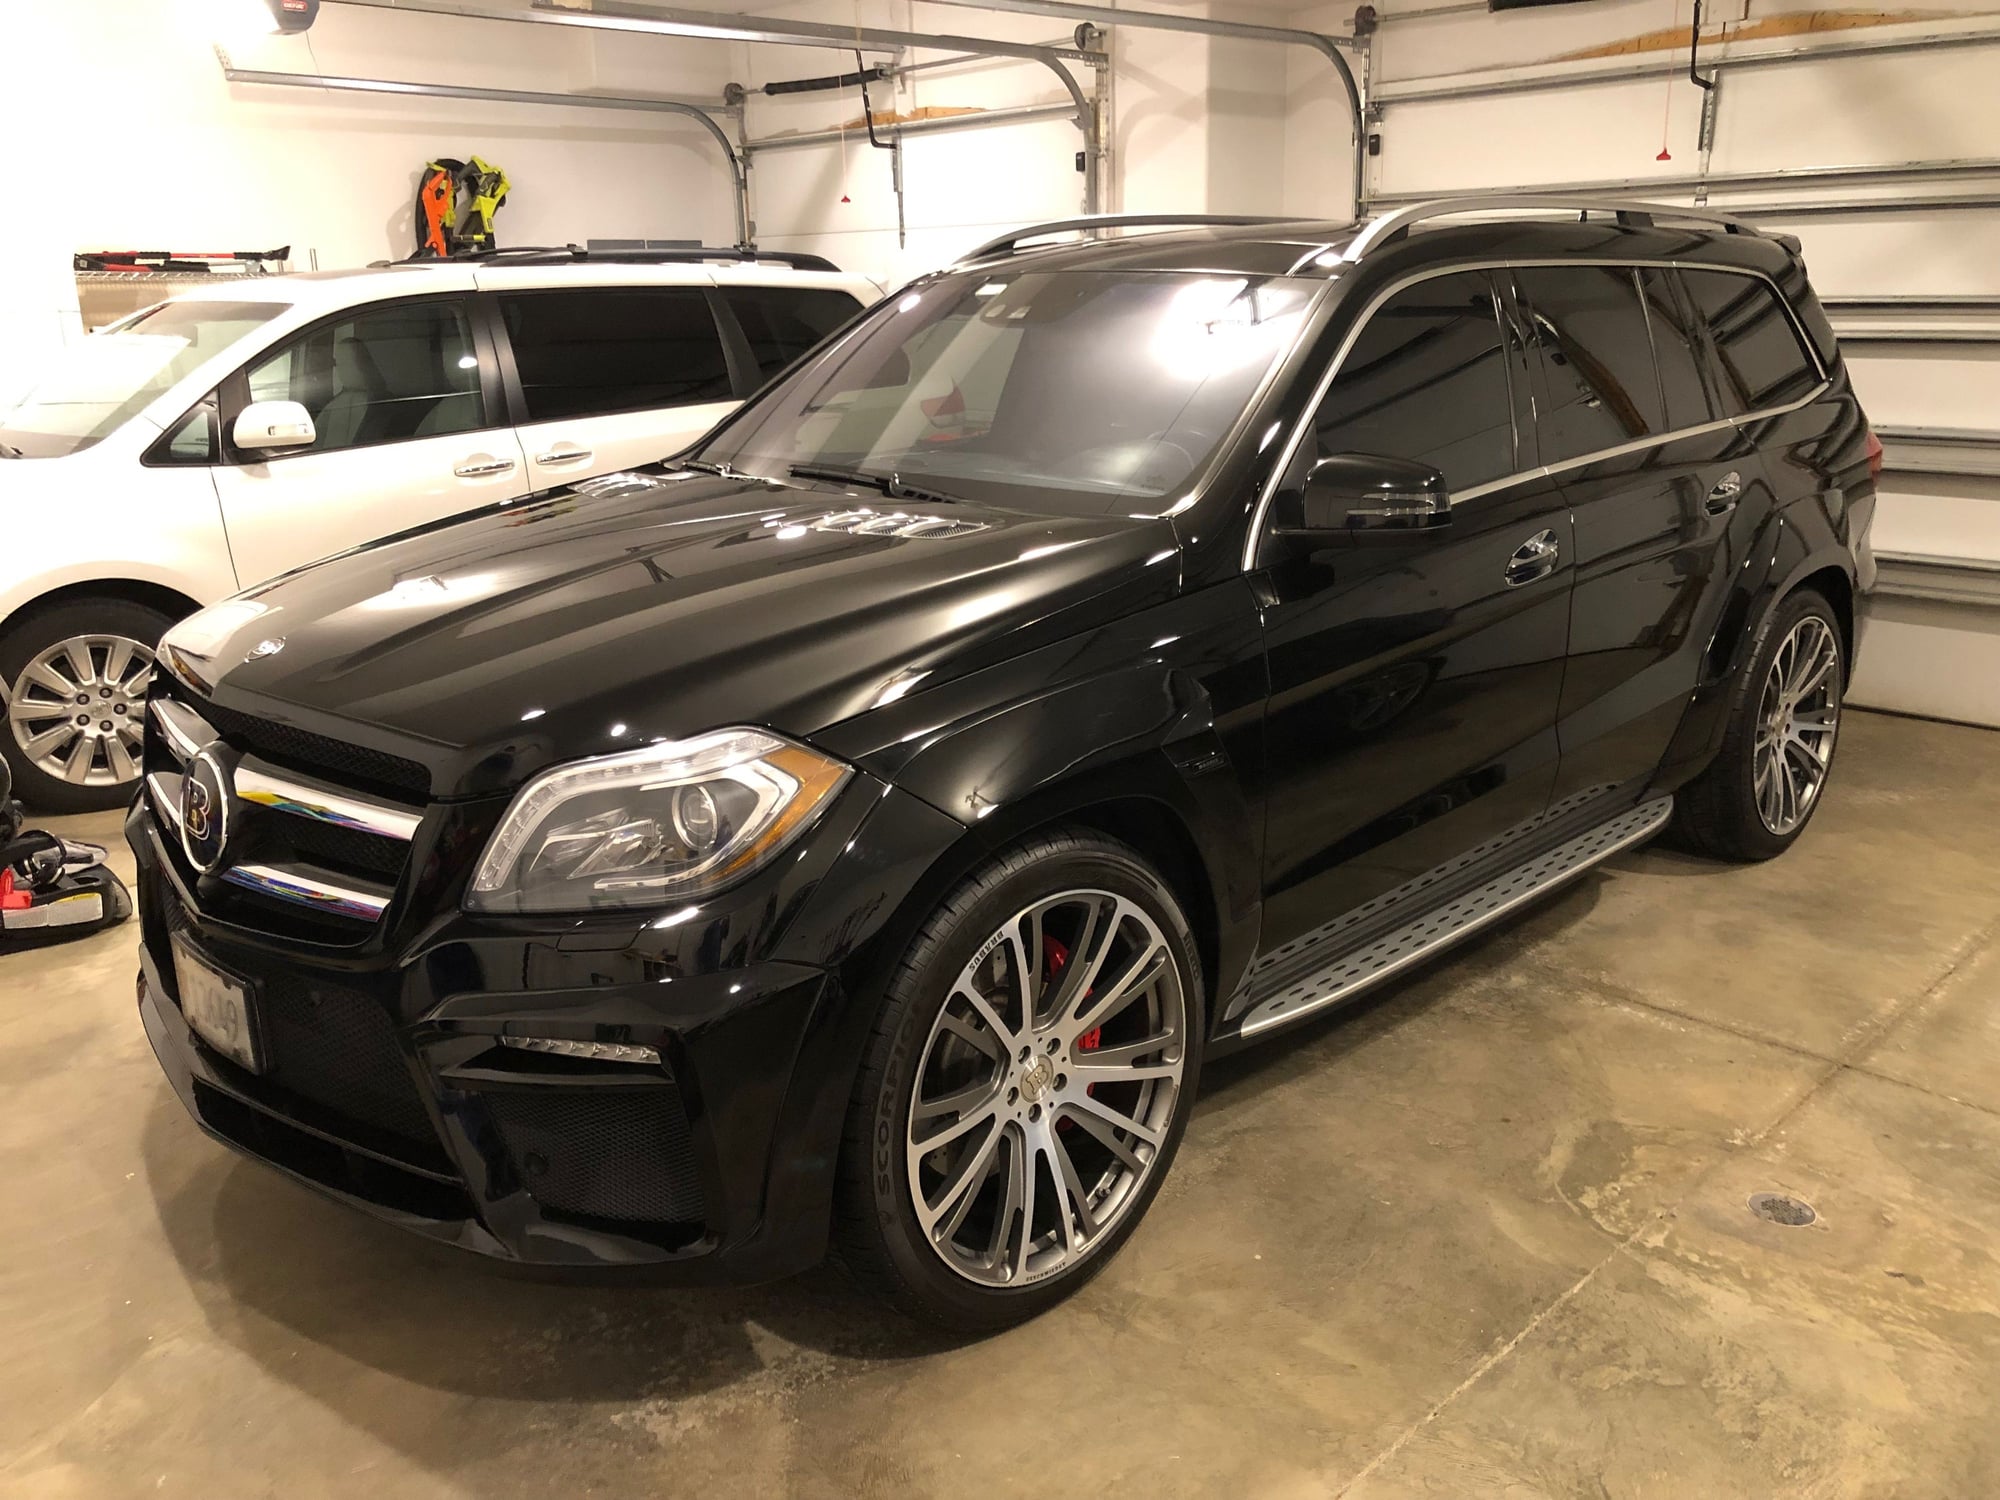 2014 Mercedes-Benz GL63 AMG - Looking to trade - Brabus Widestar B63 - 2014 Mercedes-Benz GL63 AMG - Black on Black - Used - VIN 4JGDF7EE9EA342055 - 65,000 Miles - 8 cyl - AWD - Automatic - SUV - Black - Peoria, IL 61615, United States